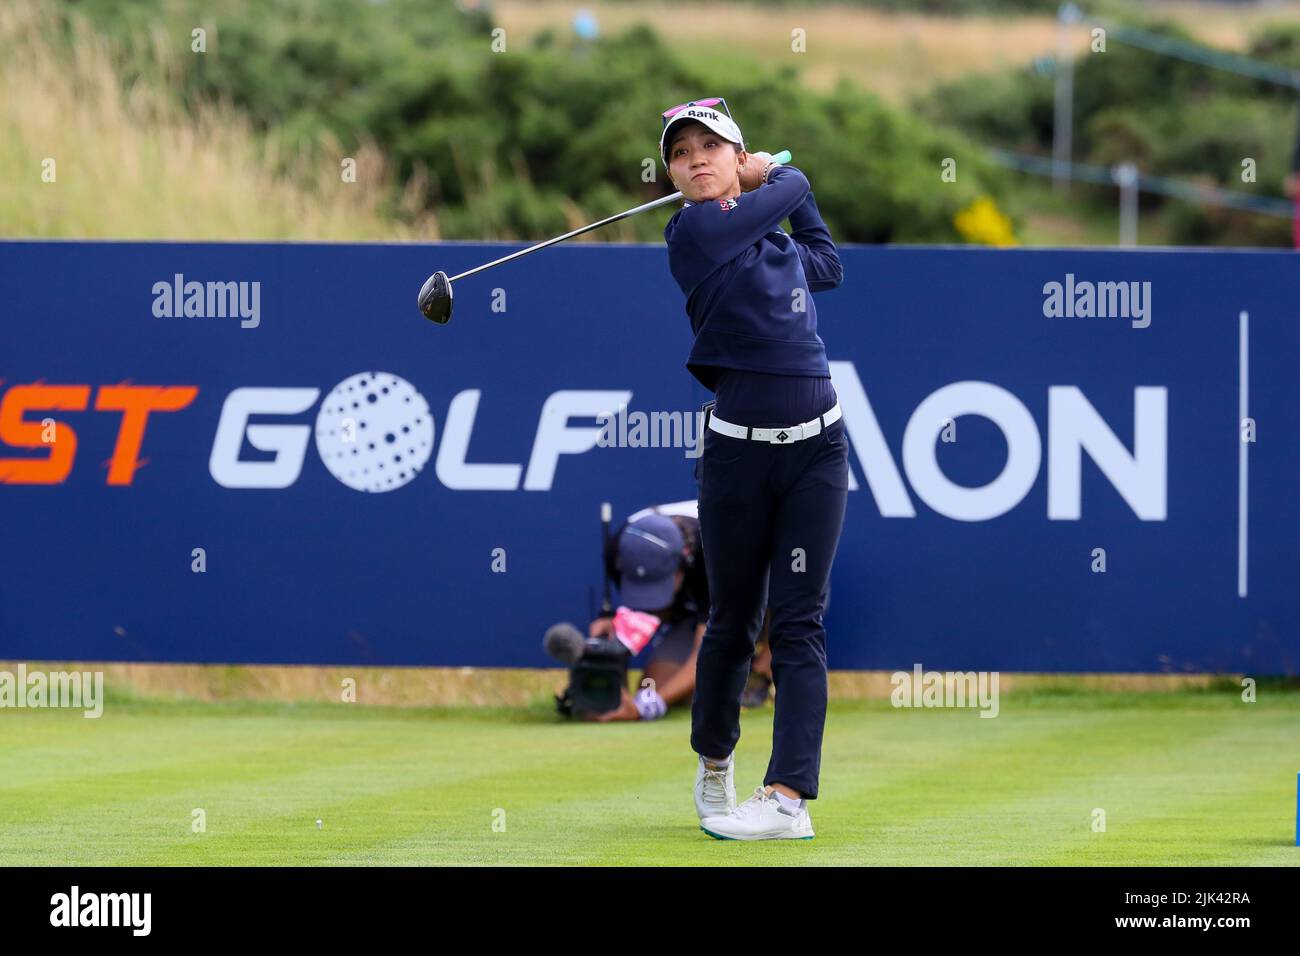 Irvine, UK. 30th July, 2022. The third round of the Trust Golf Women's Scottish Golf took place with 75 players making the cut. Heavy overnight rain from Friday into Saturday made for a softer and more testing course. Eun-Hee Ji teeing off. Credit: Findlay/Alamy Live News Stock Photo